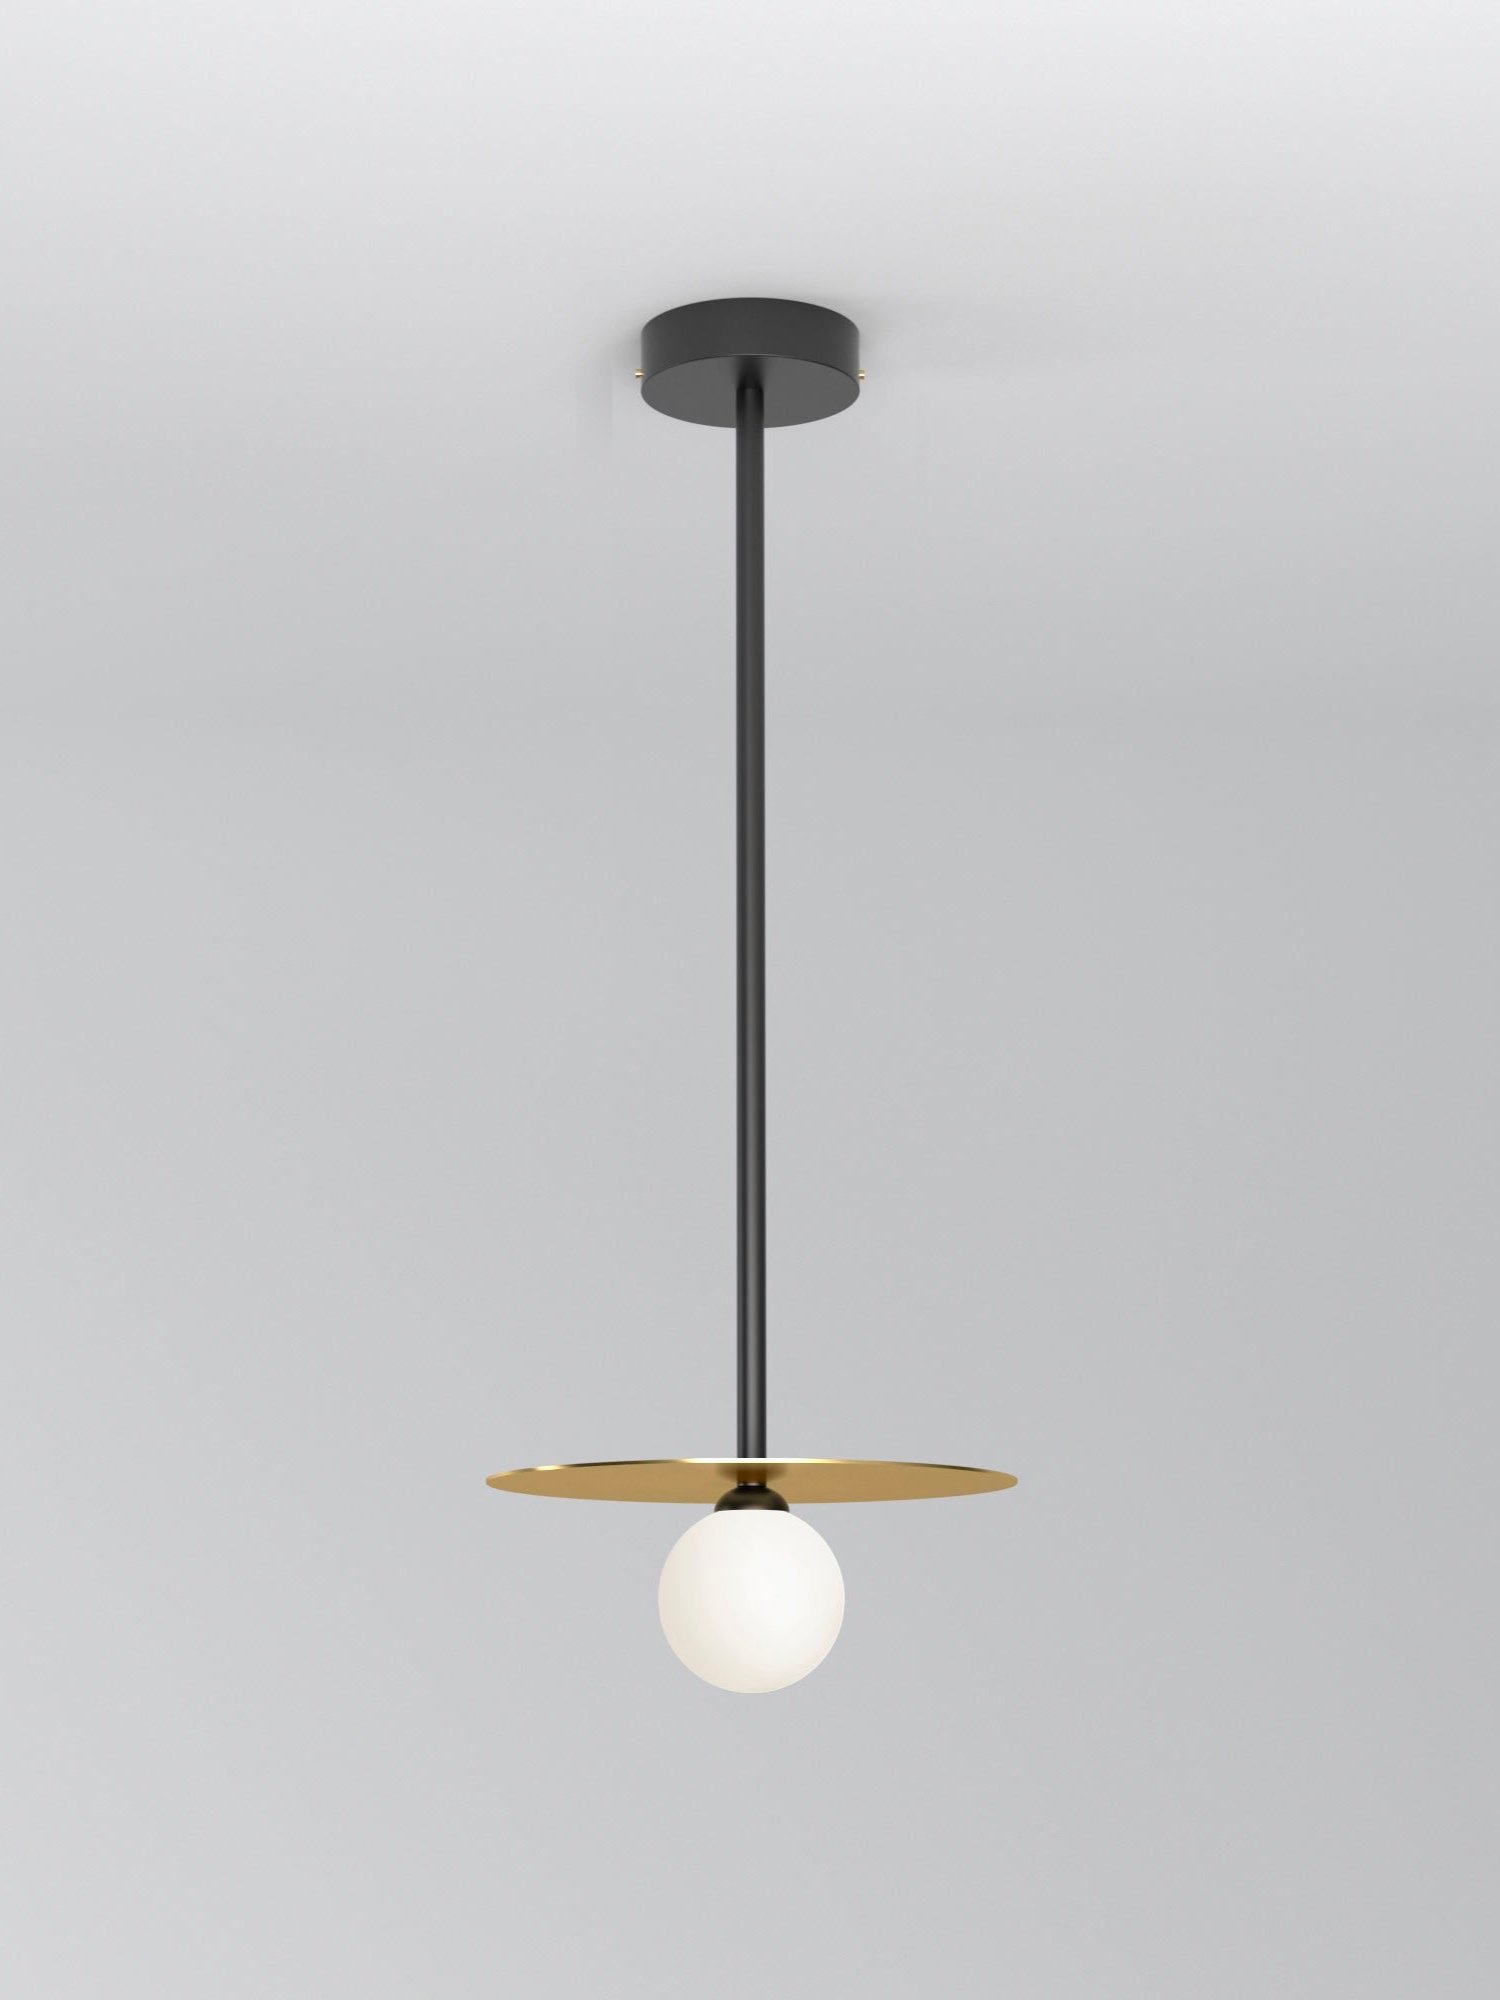 DISC AND SPHERE PENDANT LIGHT / HORIZONTAL / METAL TUBE / PILL BOX 27mm ATTACHMENT 